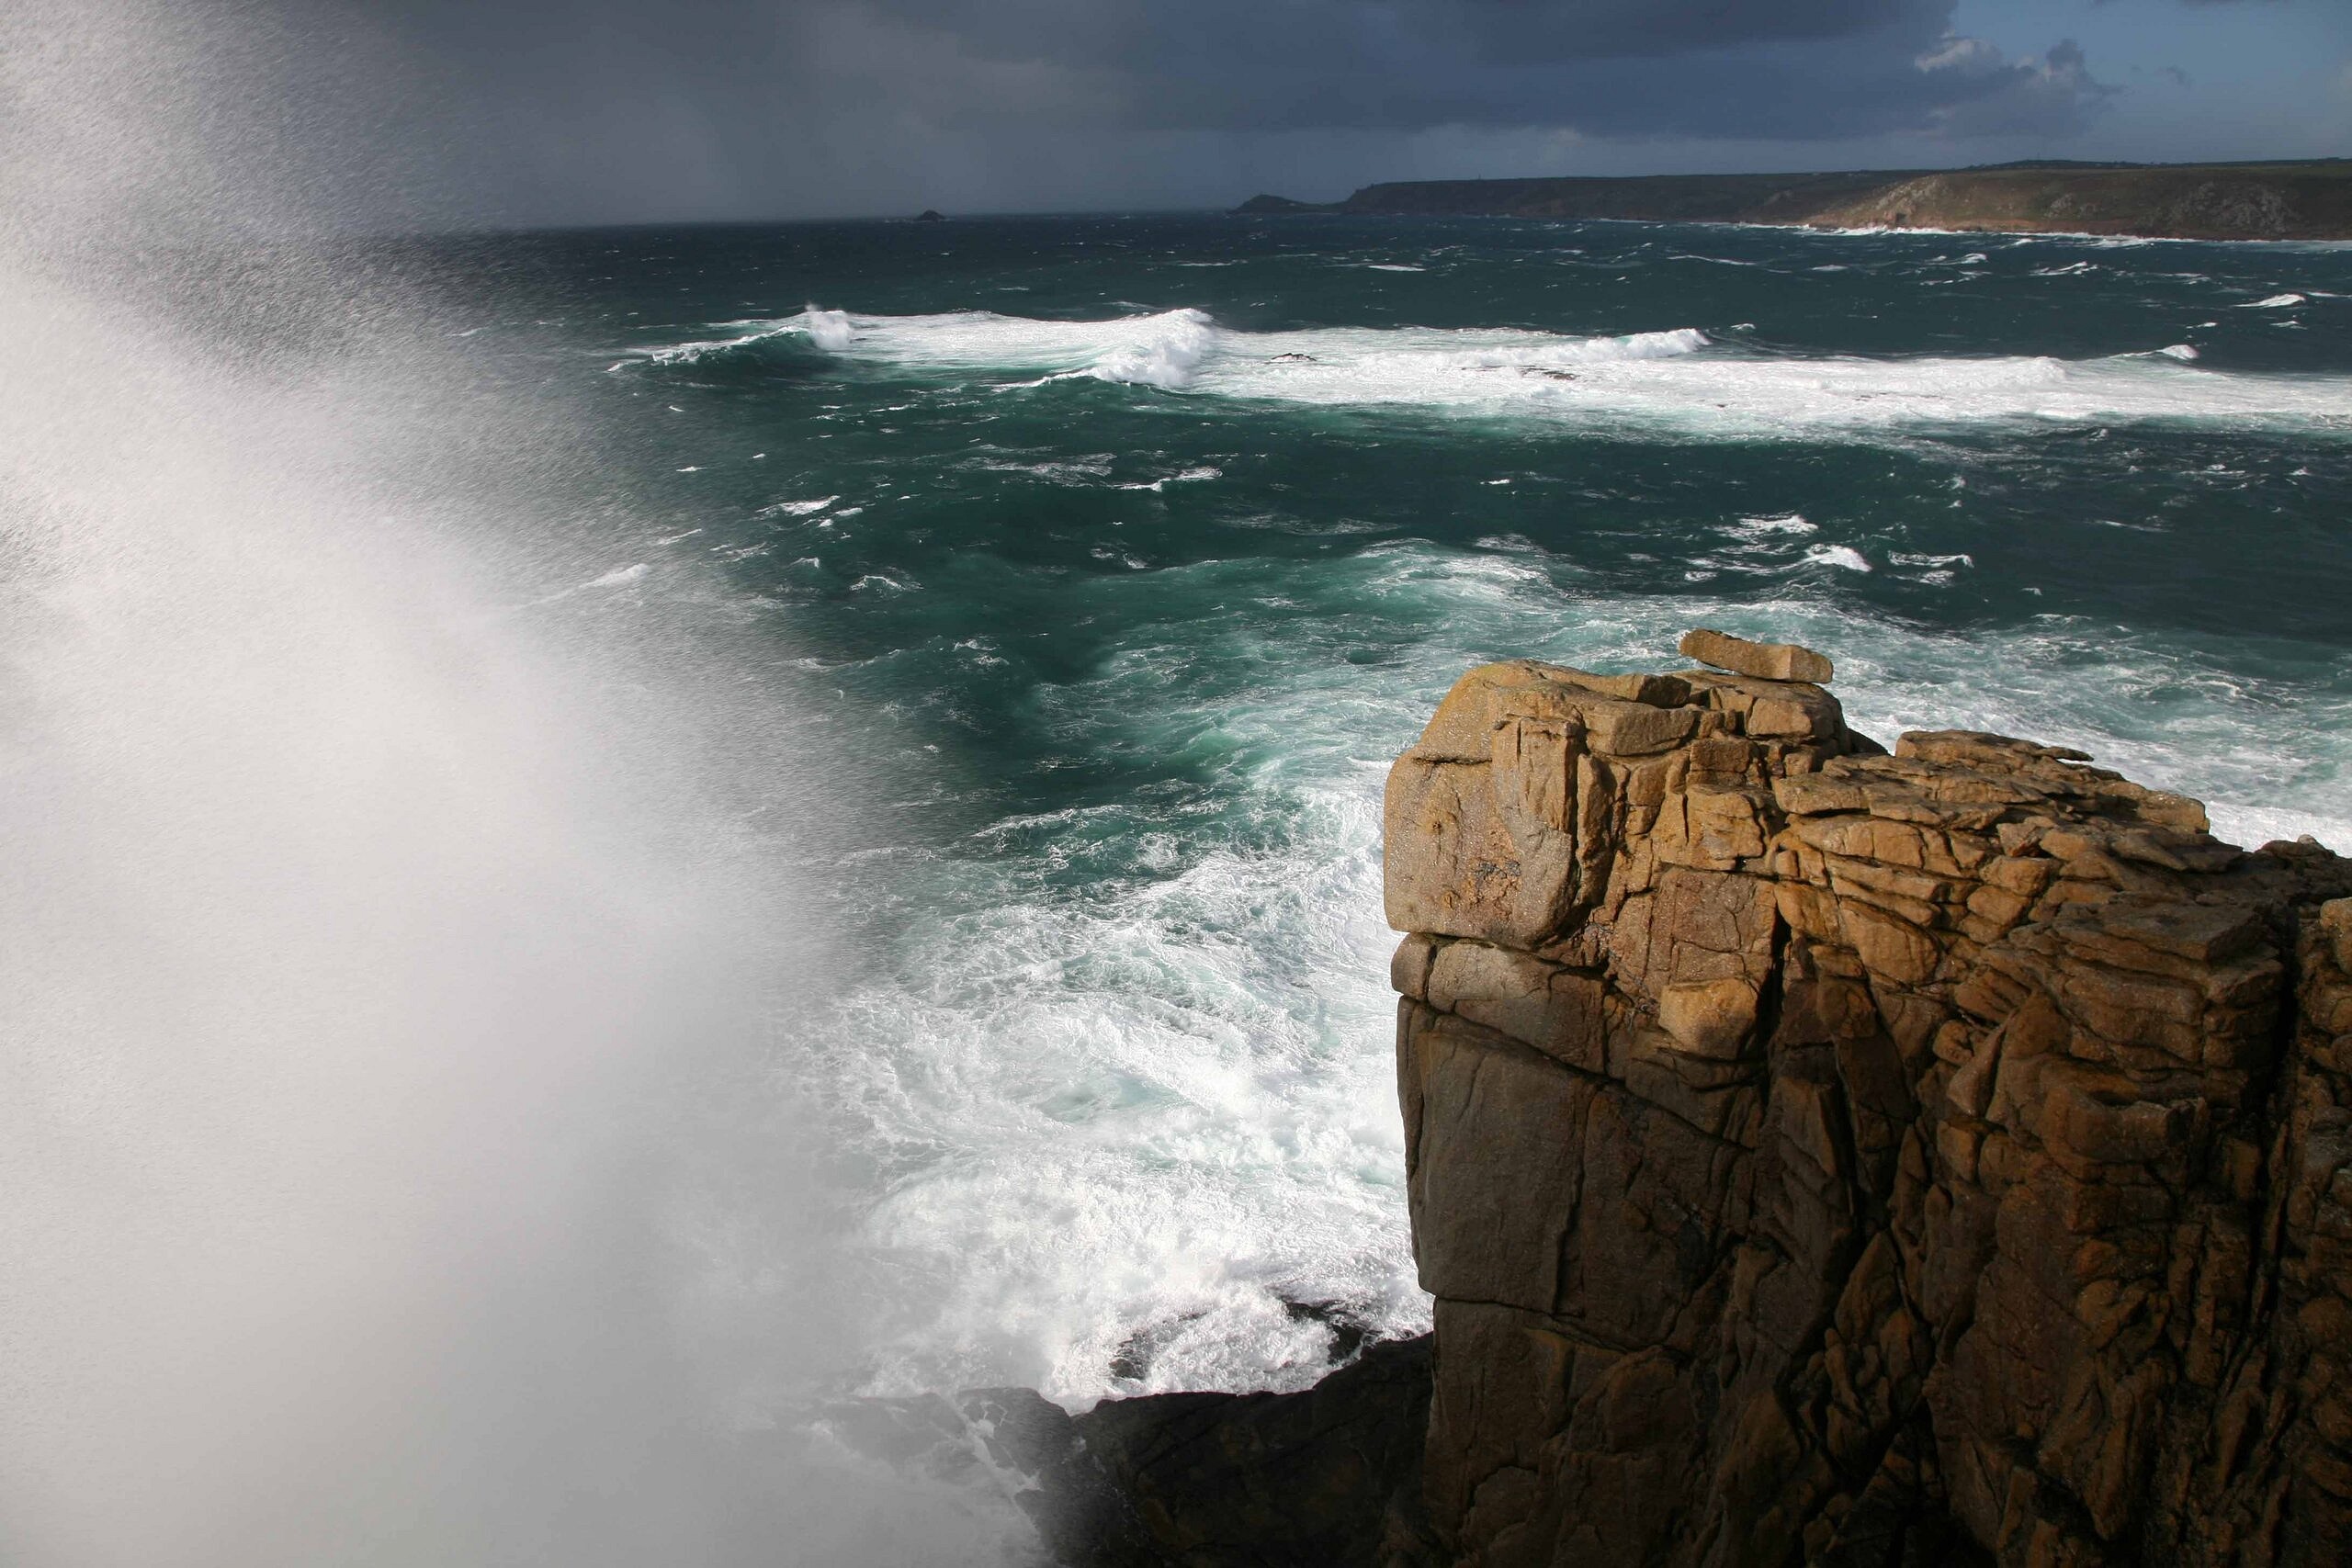 A huge wave breaks over the top of the Sennen cliffs in West Penwith, Cornwall, in a Force 9 gale.   © Dave Pickford